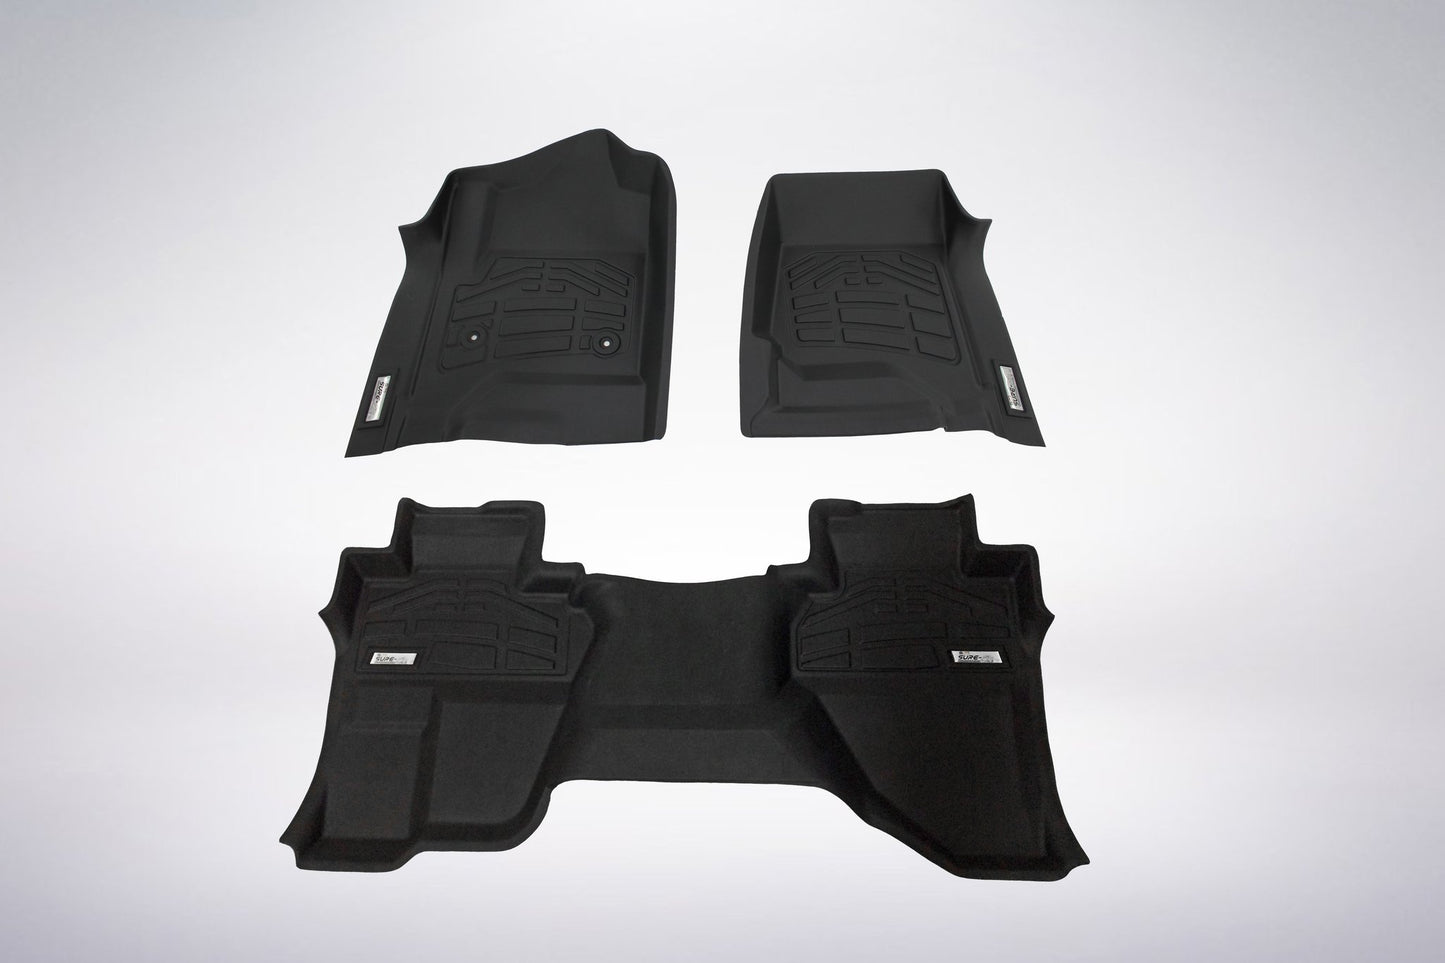 Black First & Second Row Floor Mats for 2016 Chevrolet Silverado 1500/2500/3500 Double Cab